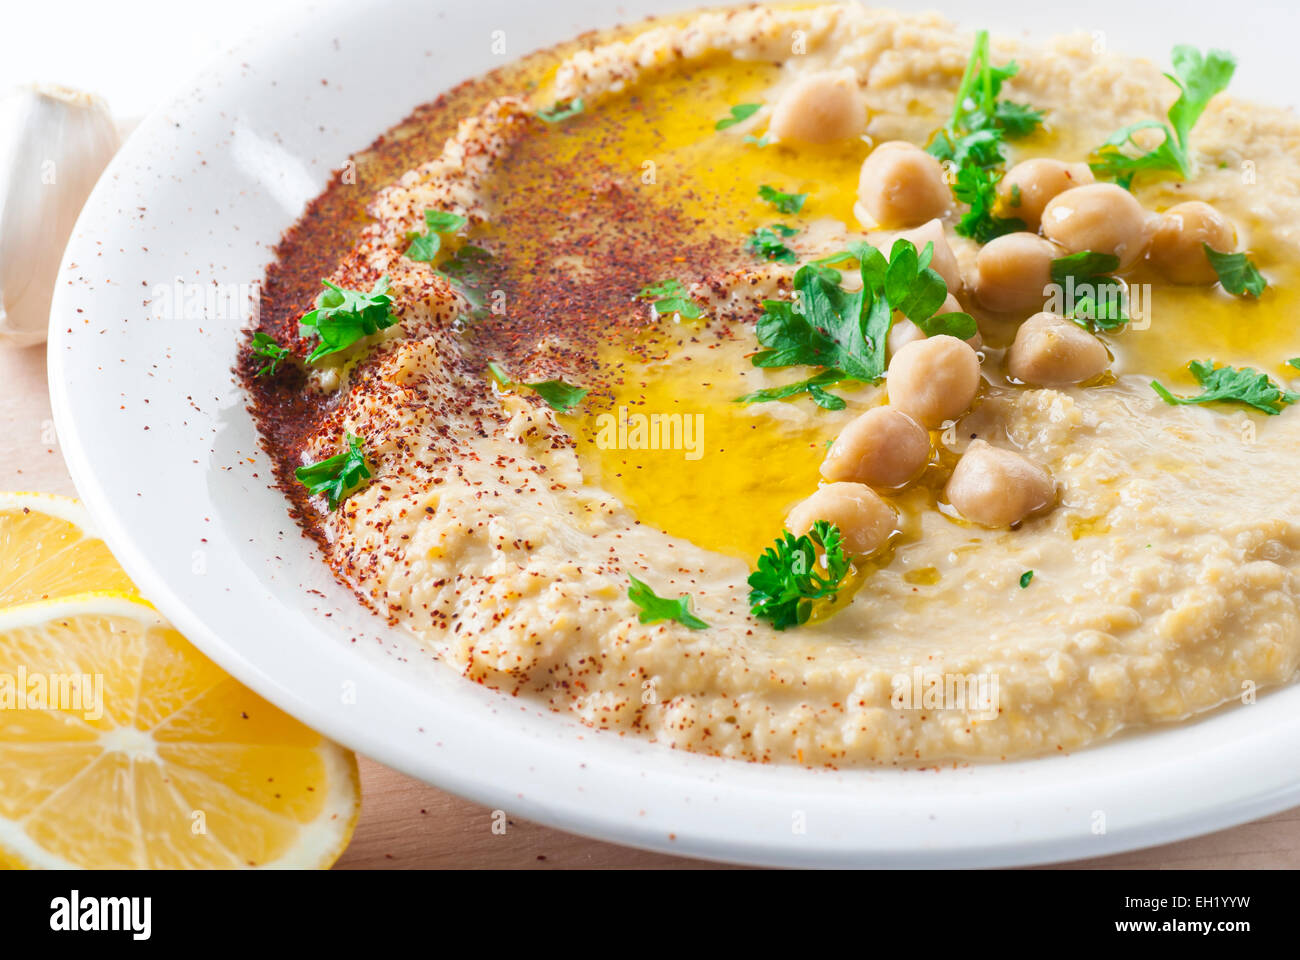 Hummus topped with olive oil, paprika and parsley. Stock Photo